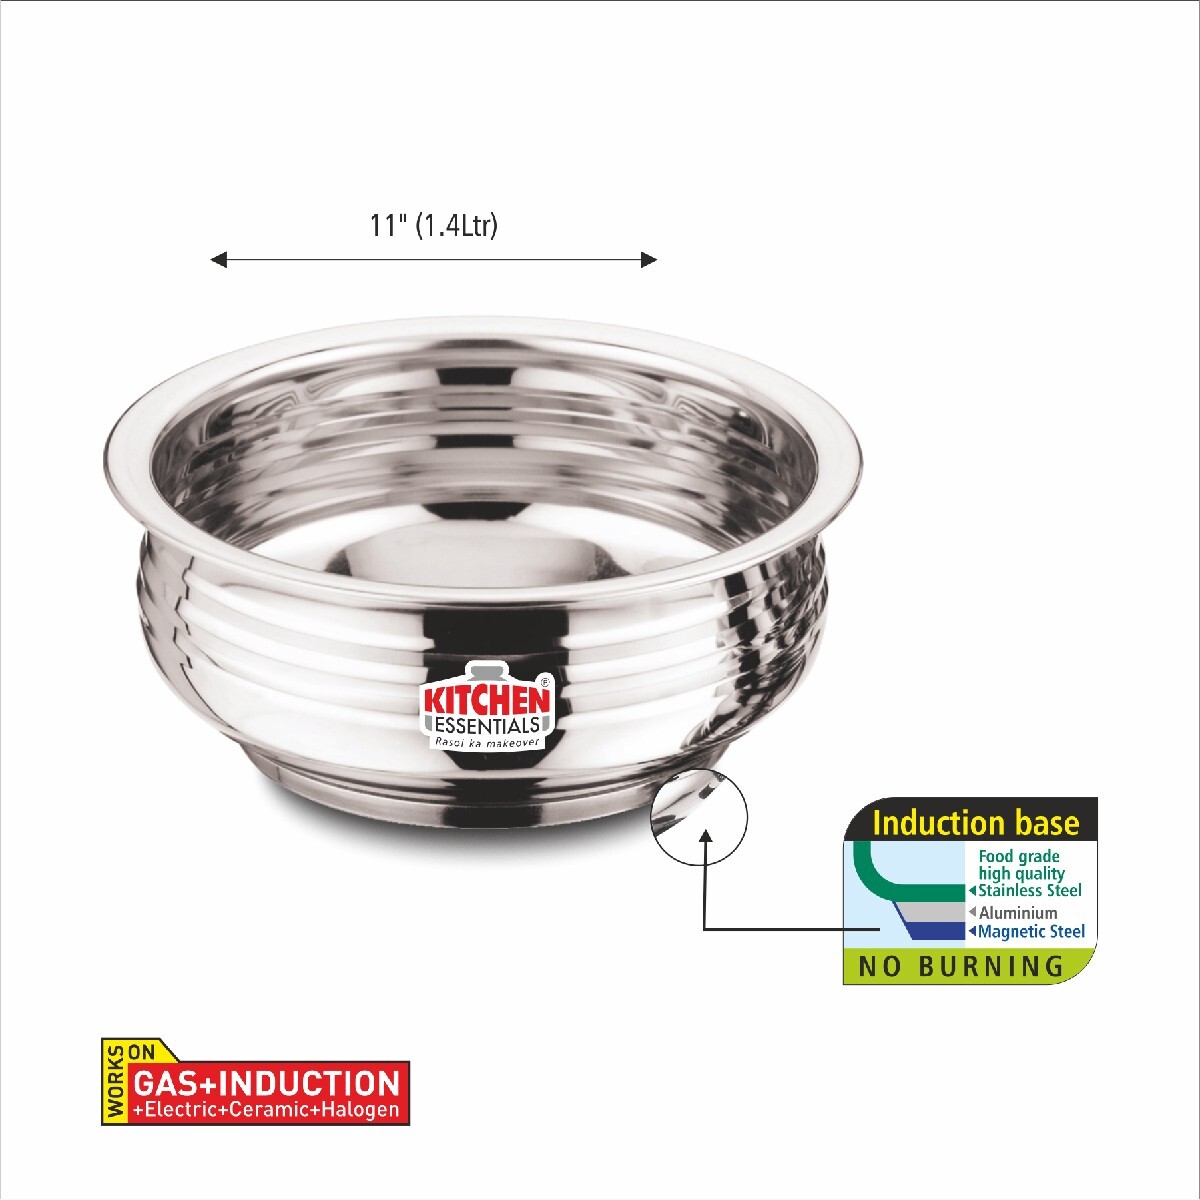 Kitchen Essential Uruly Induction Base Stainless Steel 11